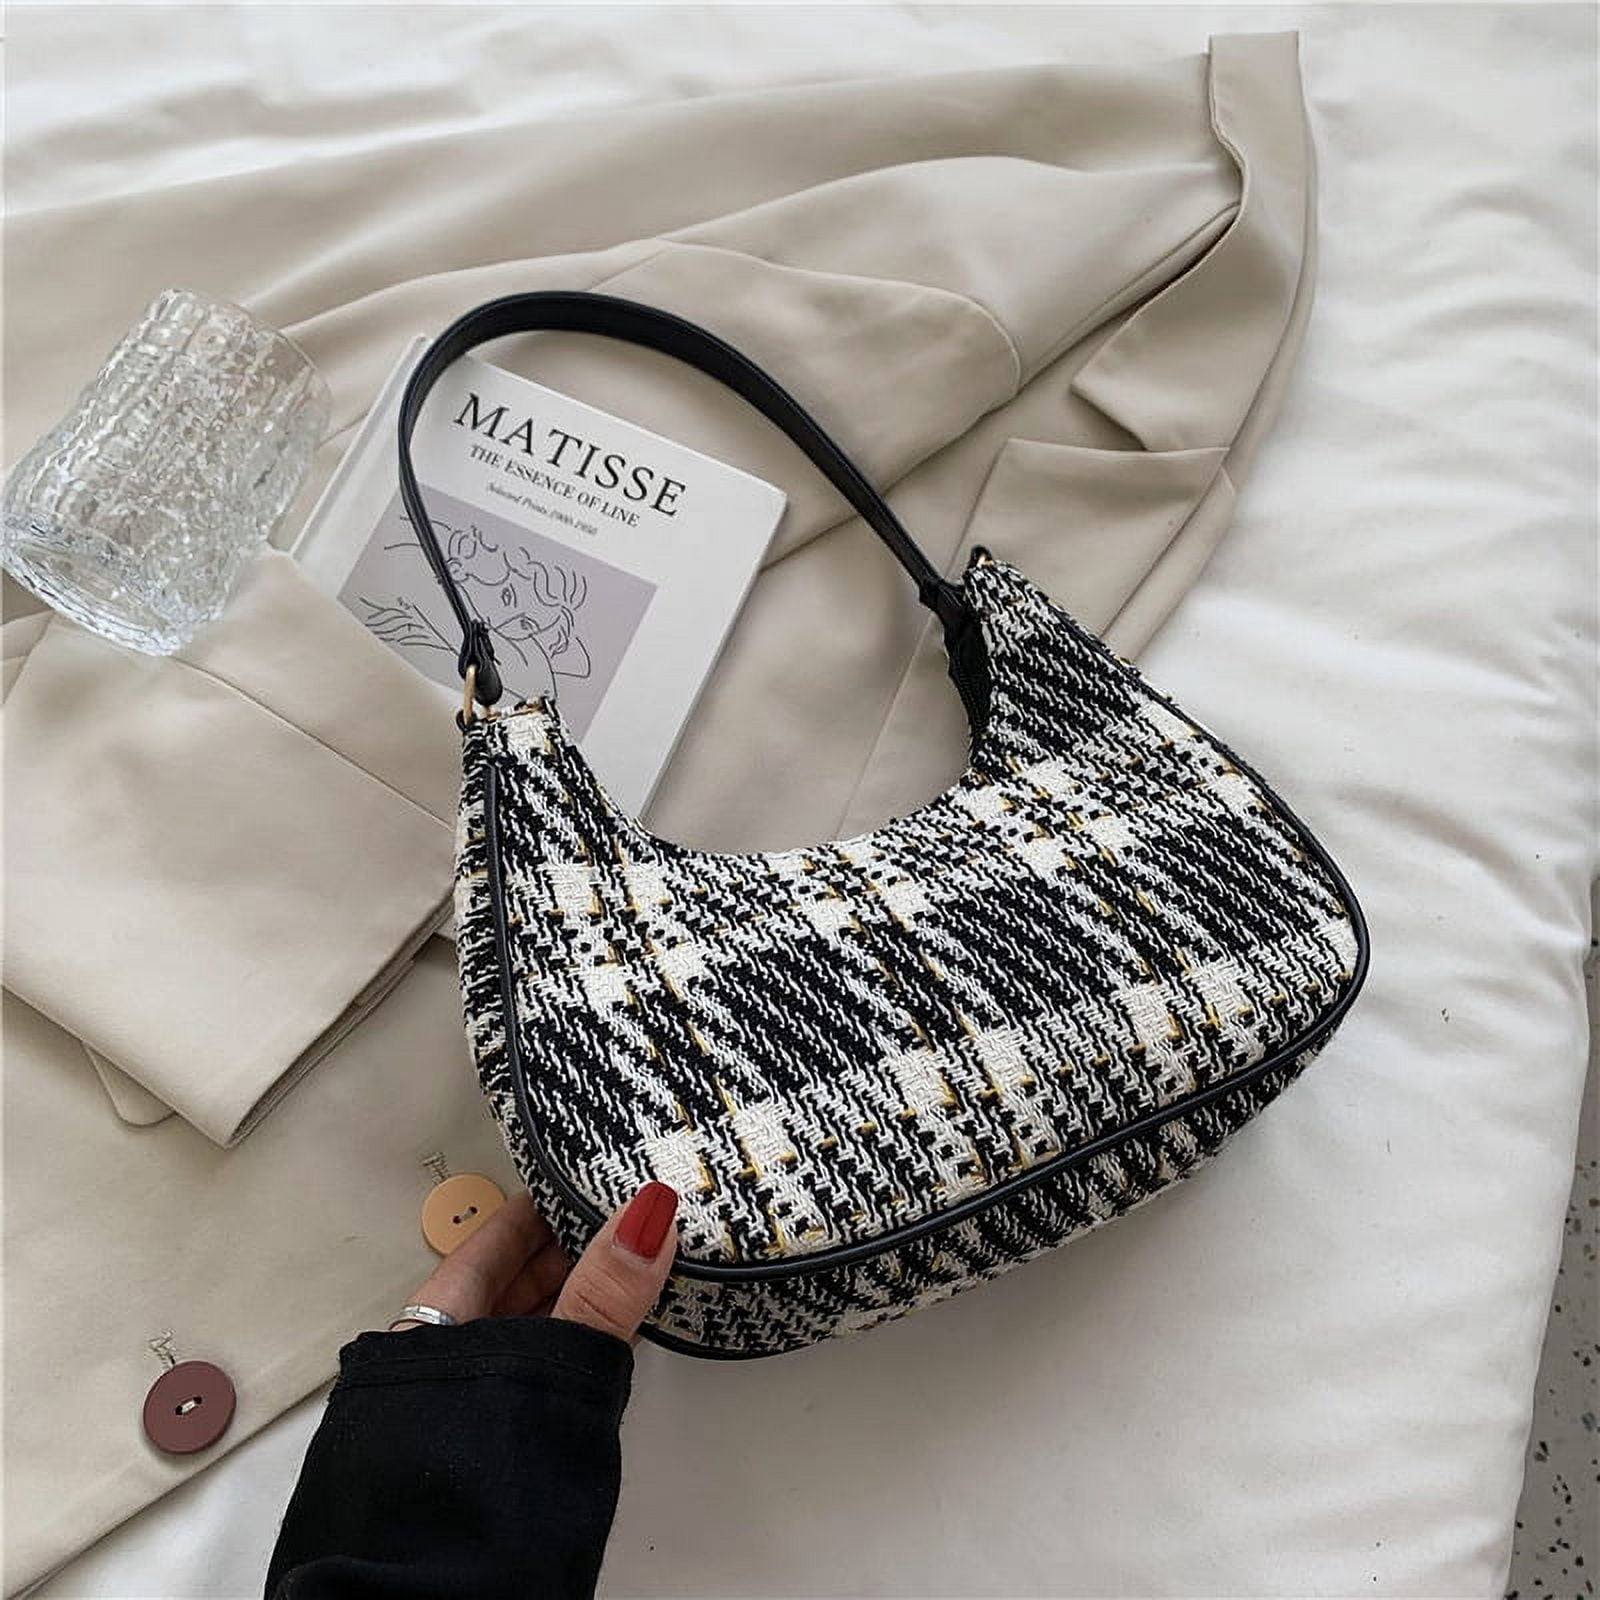 Qwzndzgr Canvas Fashion Small Bag Women's 2022 New Fashion Summer Simple Shoulder Bag Texture Foreign Style Crossbody Bag, Adult Unisex, Size: One